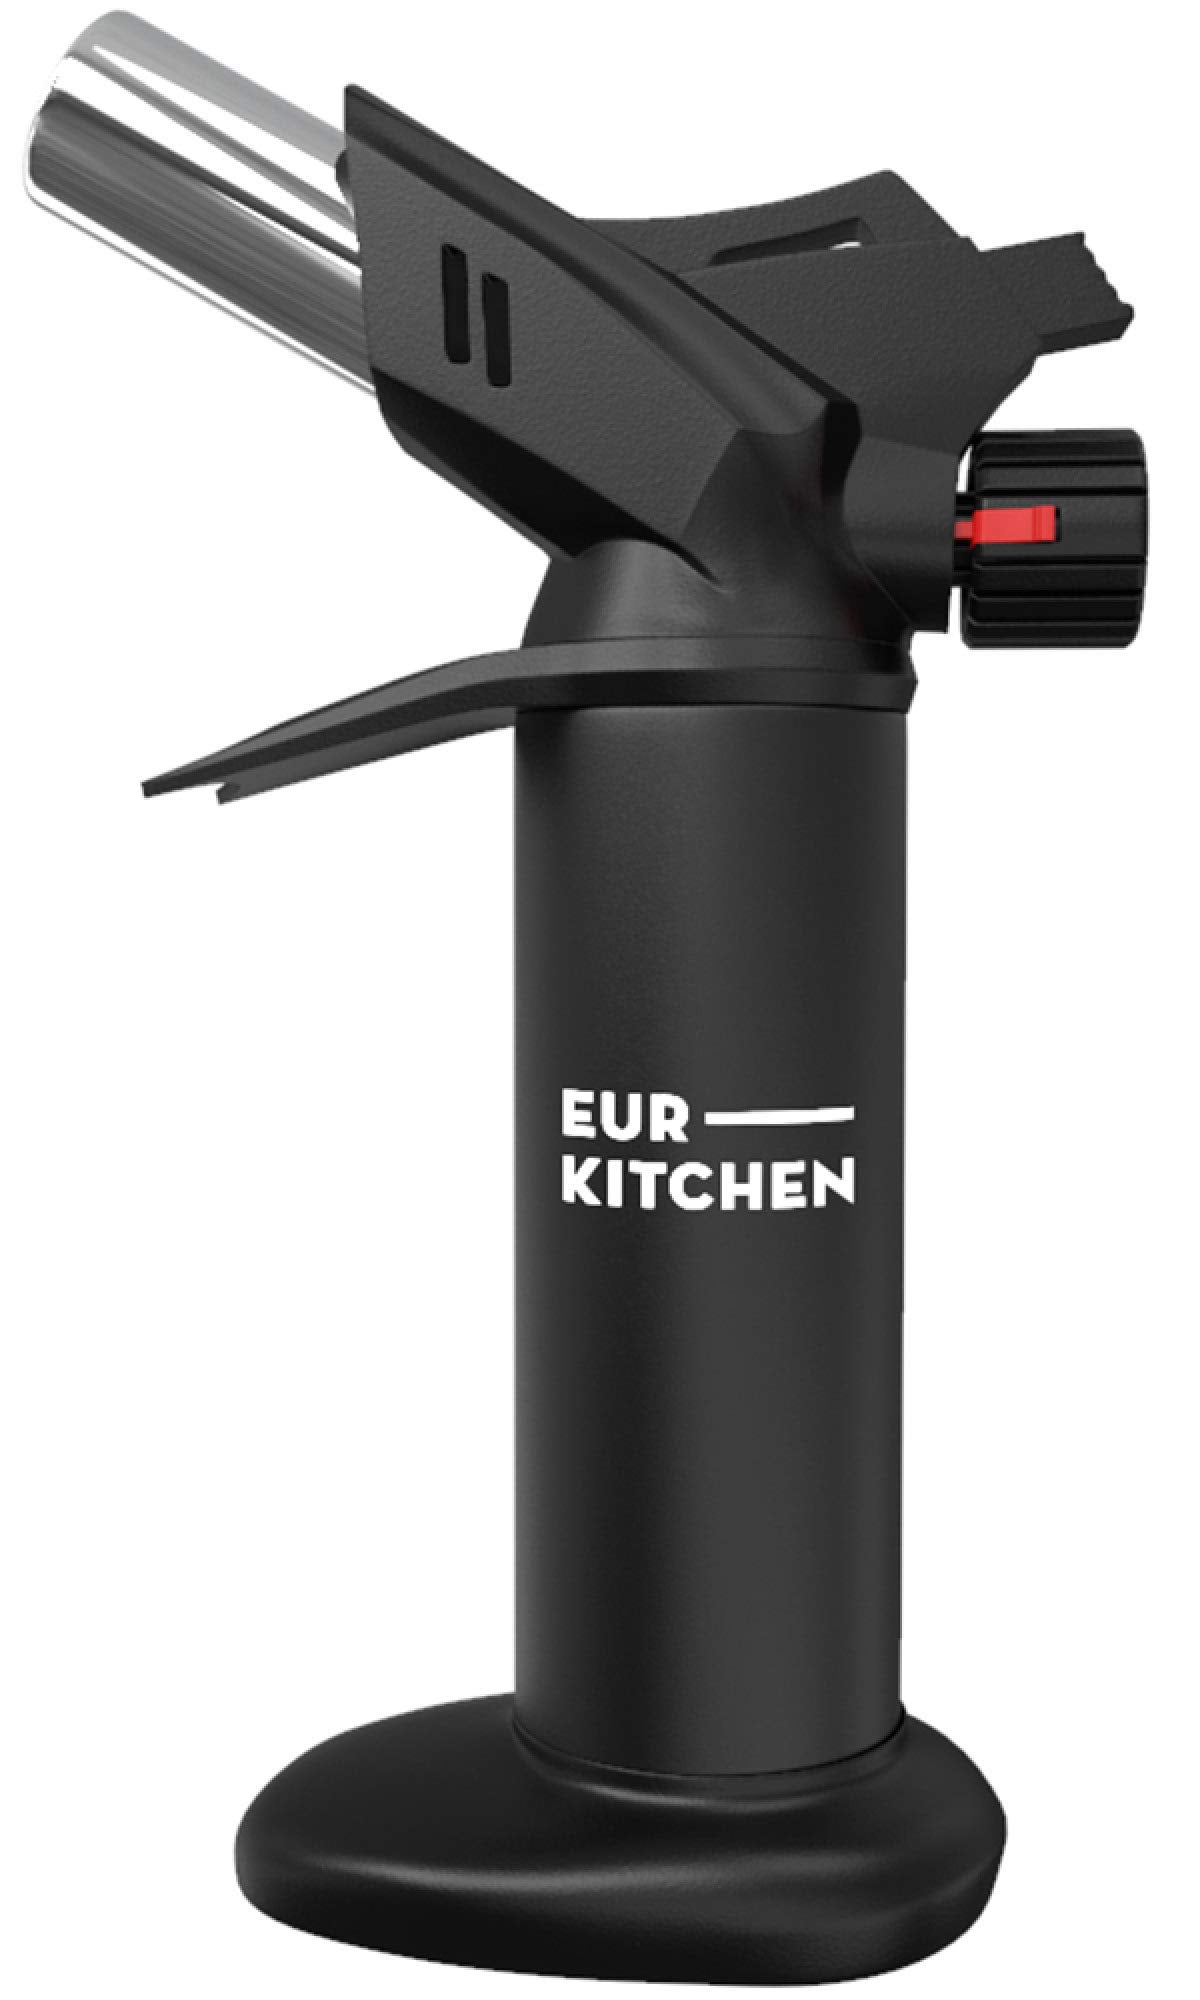 EurKitchen - Large Culinary Butane Torch with Safety Lock, Adjustable Flame & More - Black - image 1 of 6